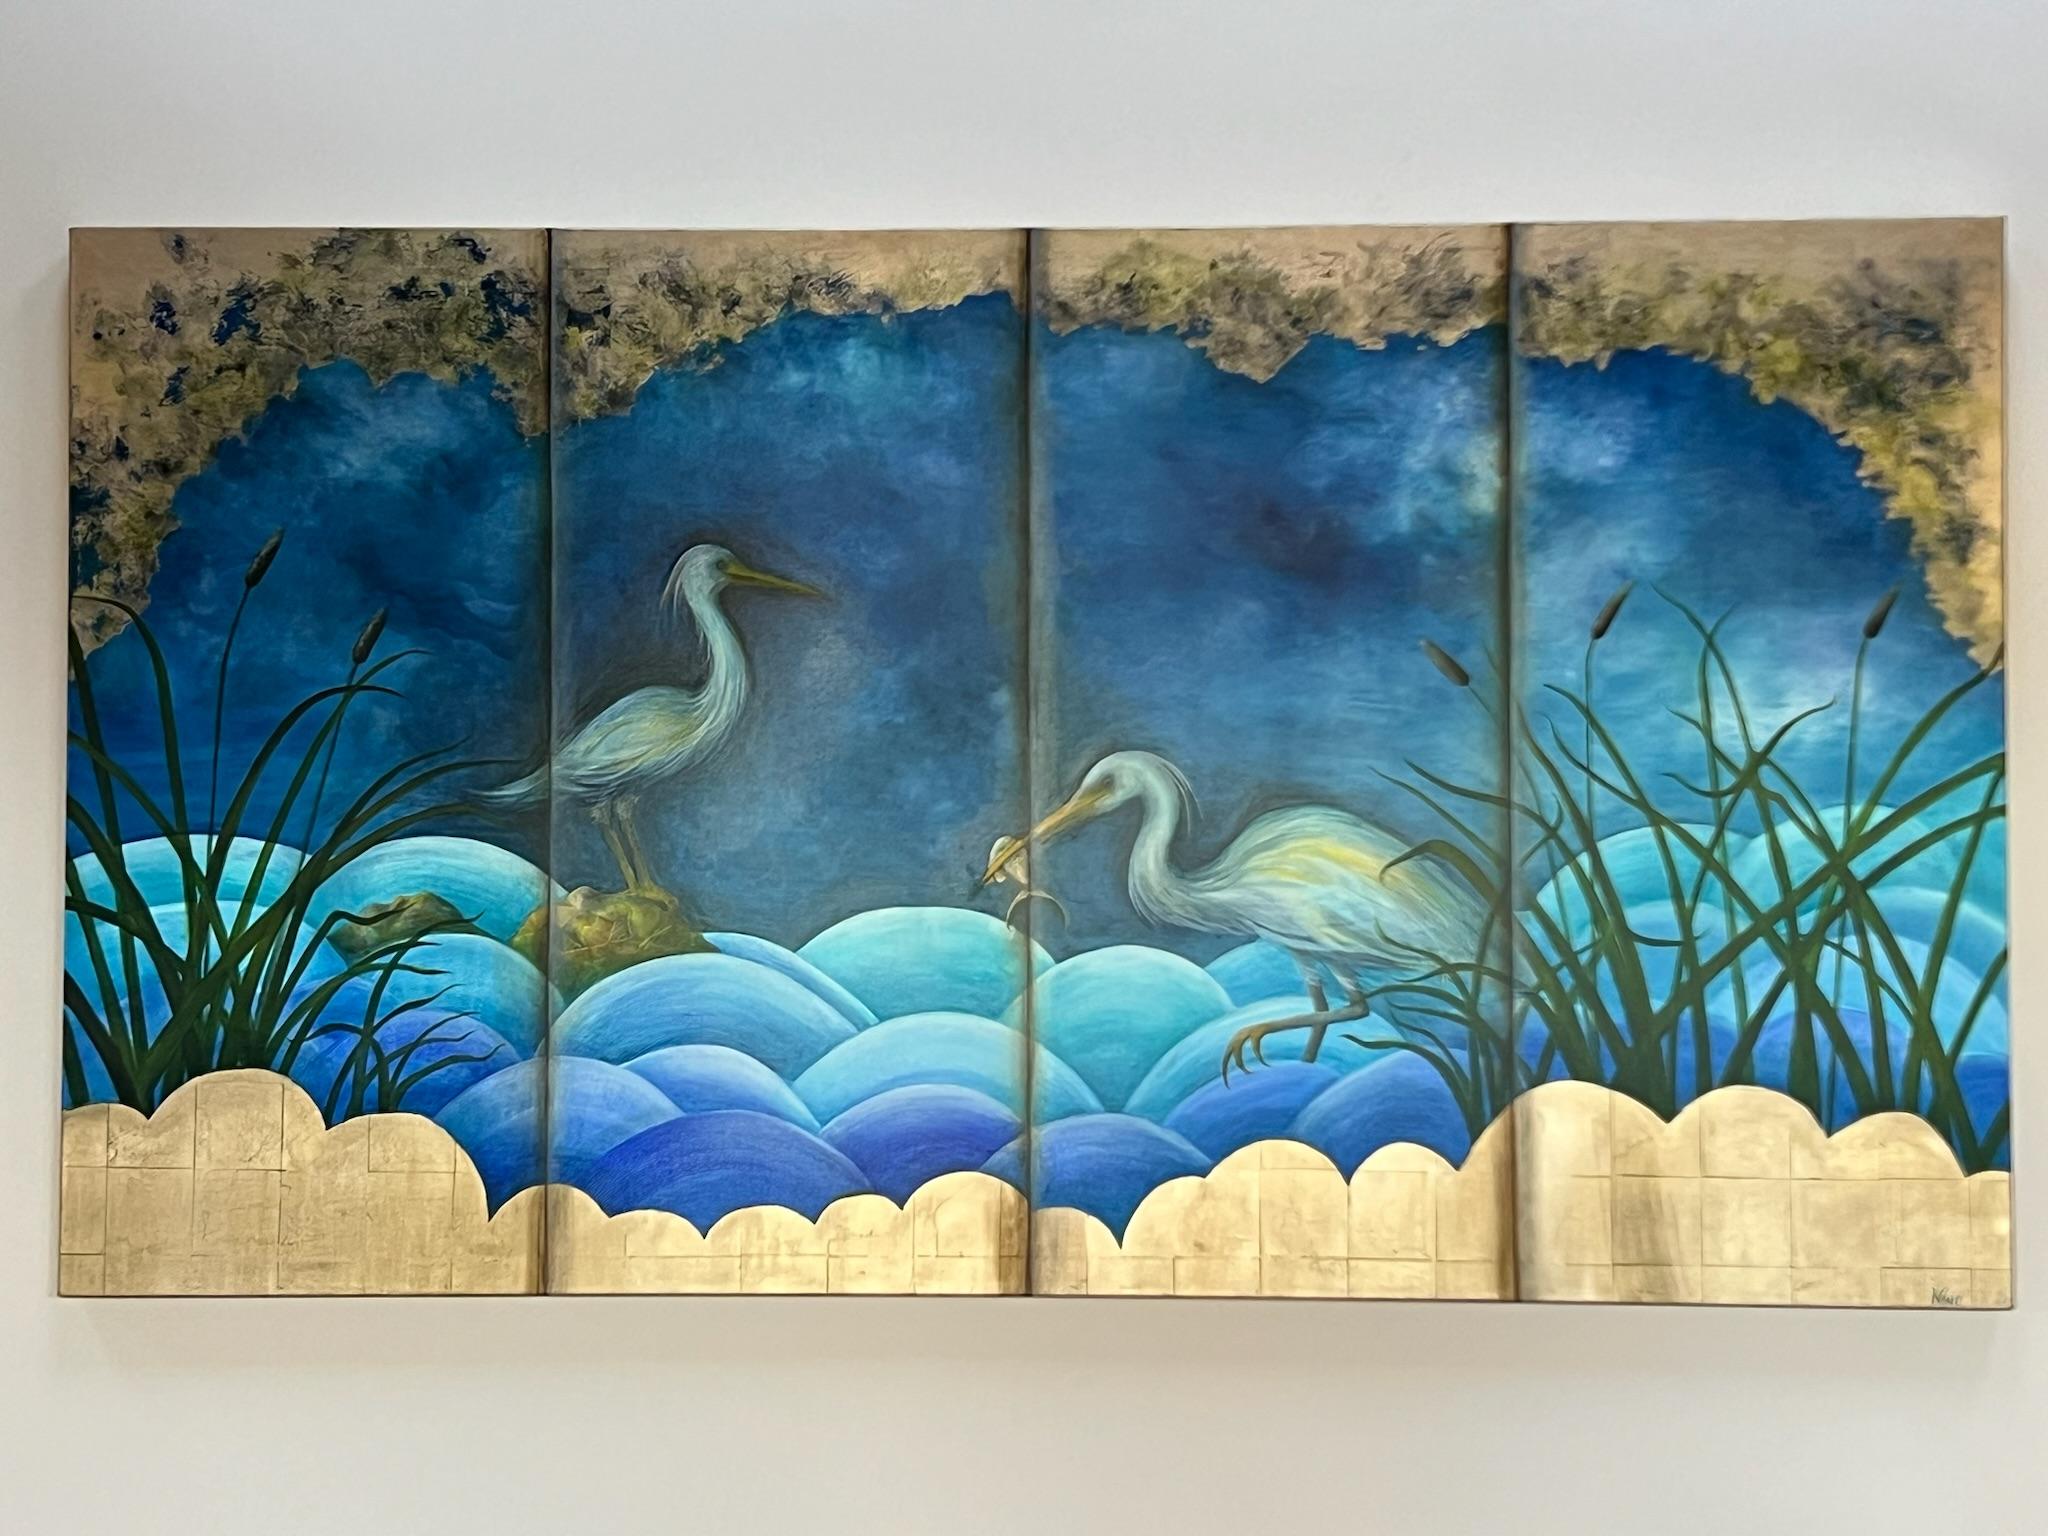 Chinoiserie Egrets, Animal painting, Birds, Art deco - Blue Animal Painting by Nonie Clayton Bennett